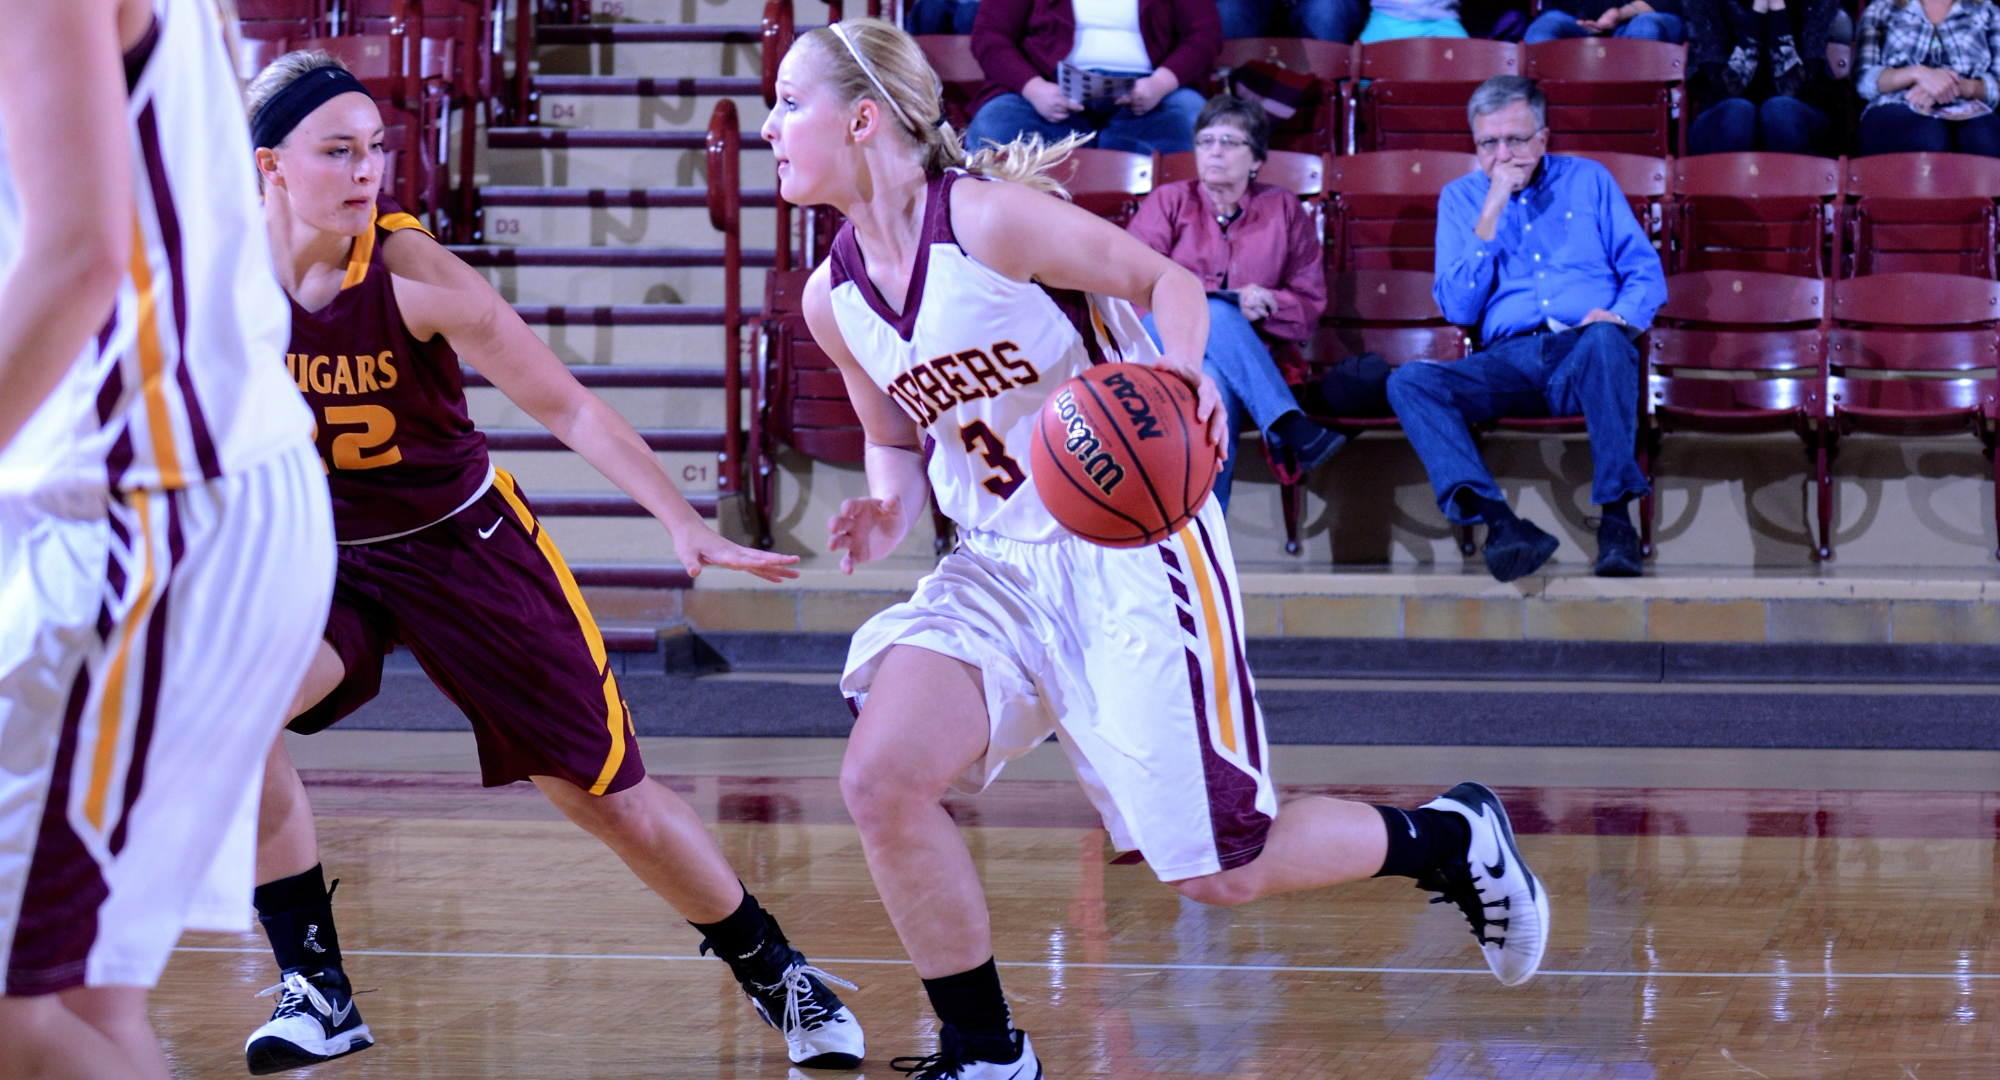 Senior Greta Walsh had a team-high 12 points and recorded three steals in the Cobbers' season-opening win over Minn.-Morris.